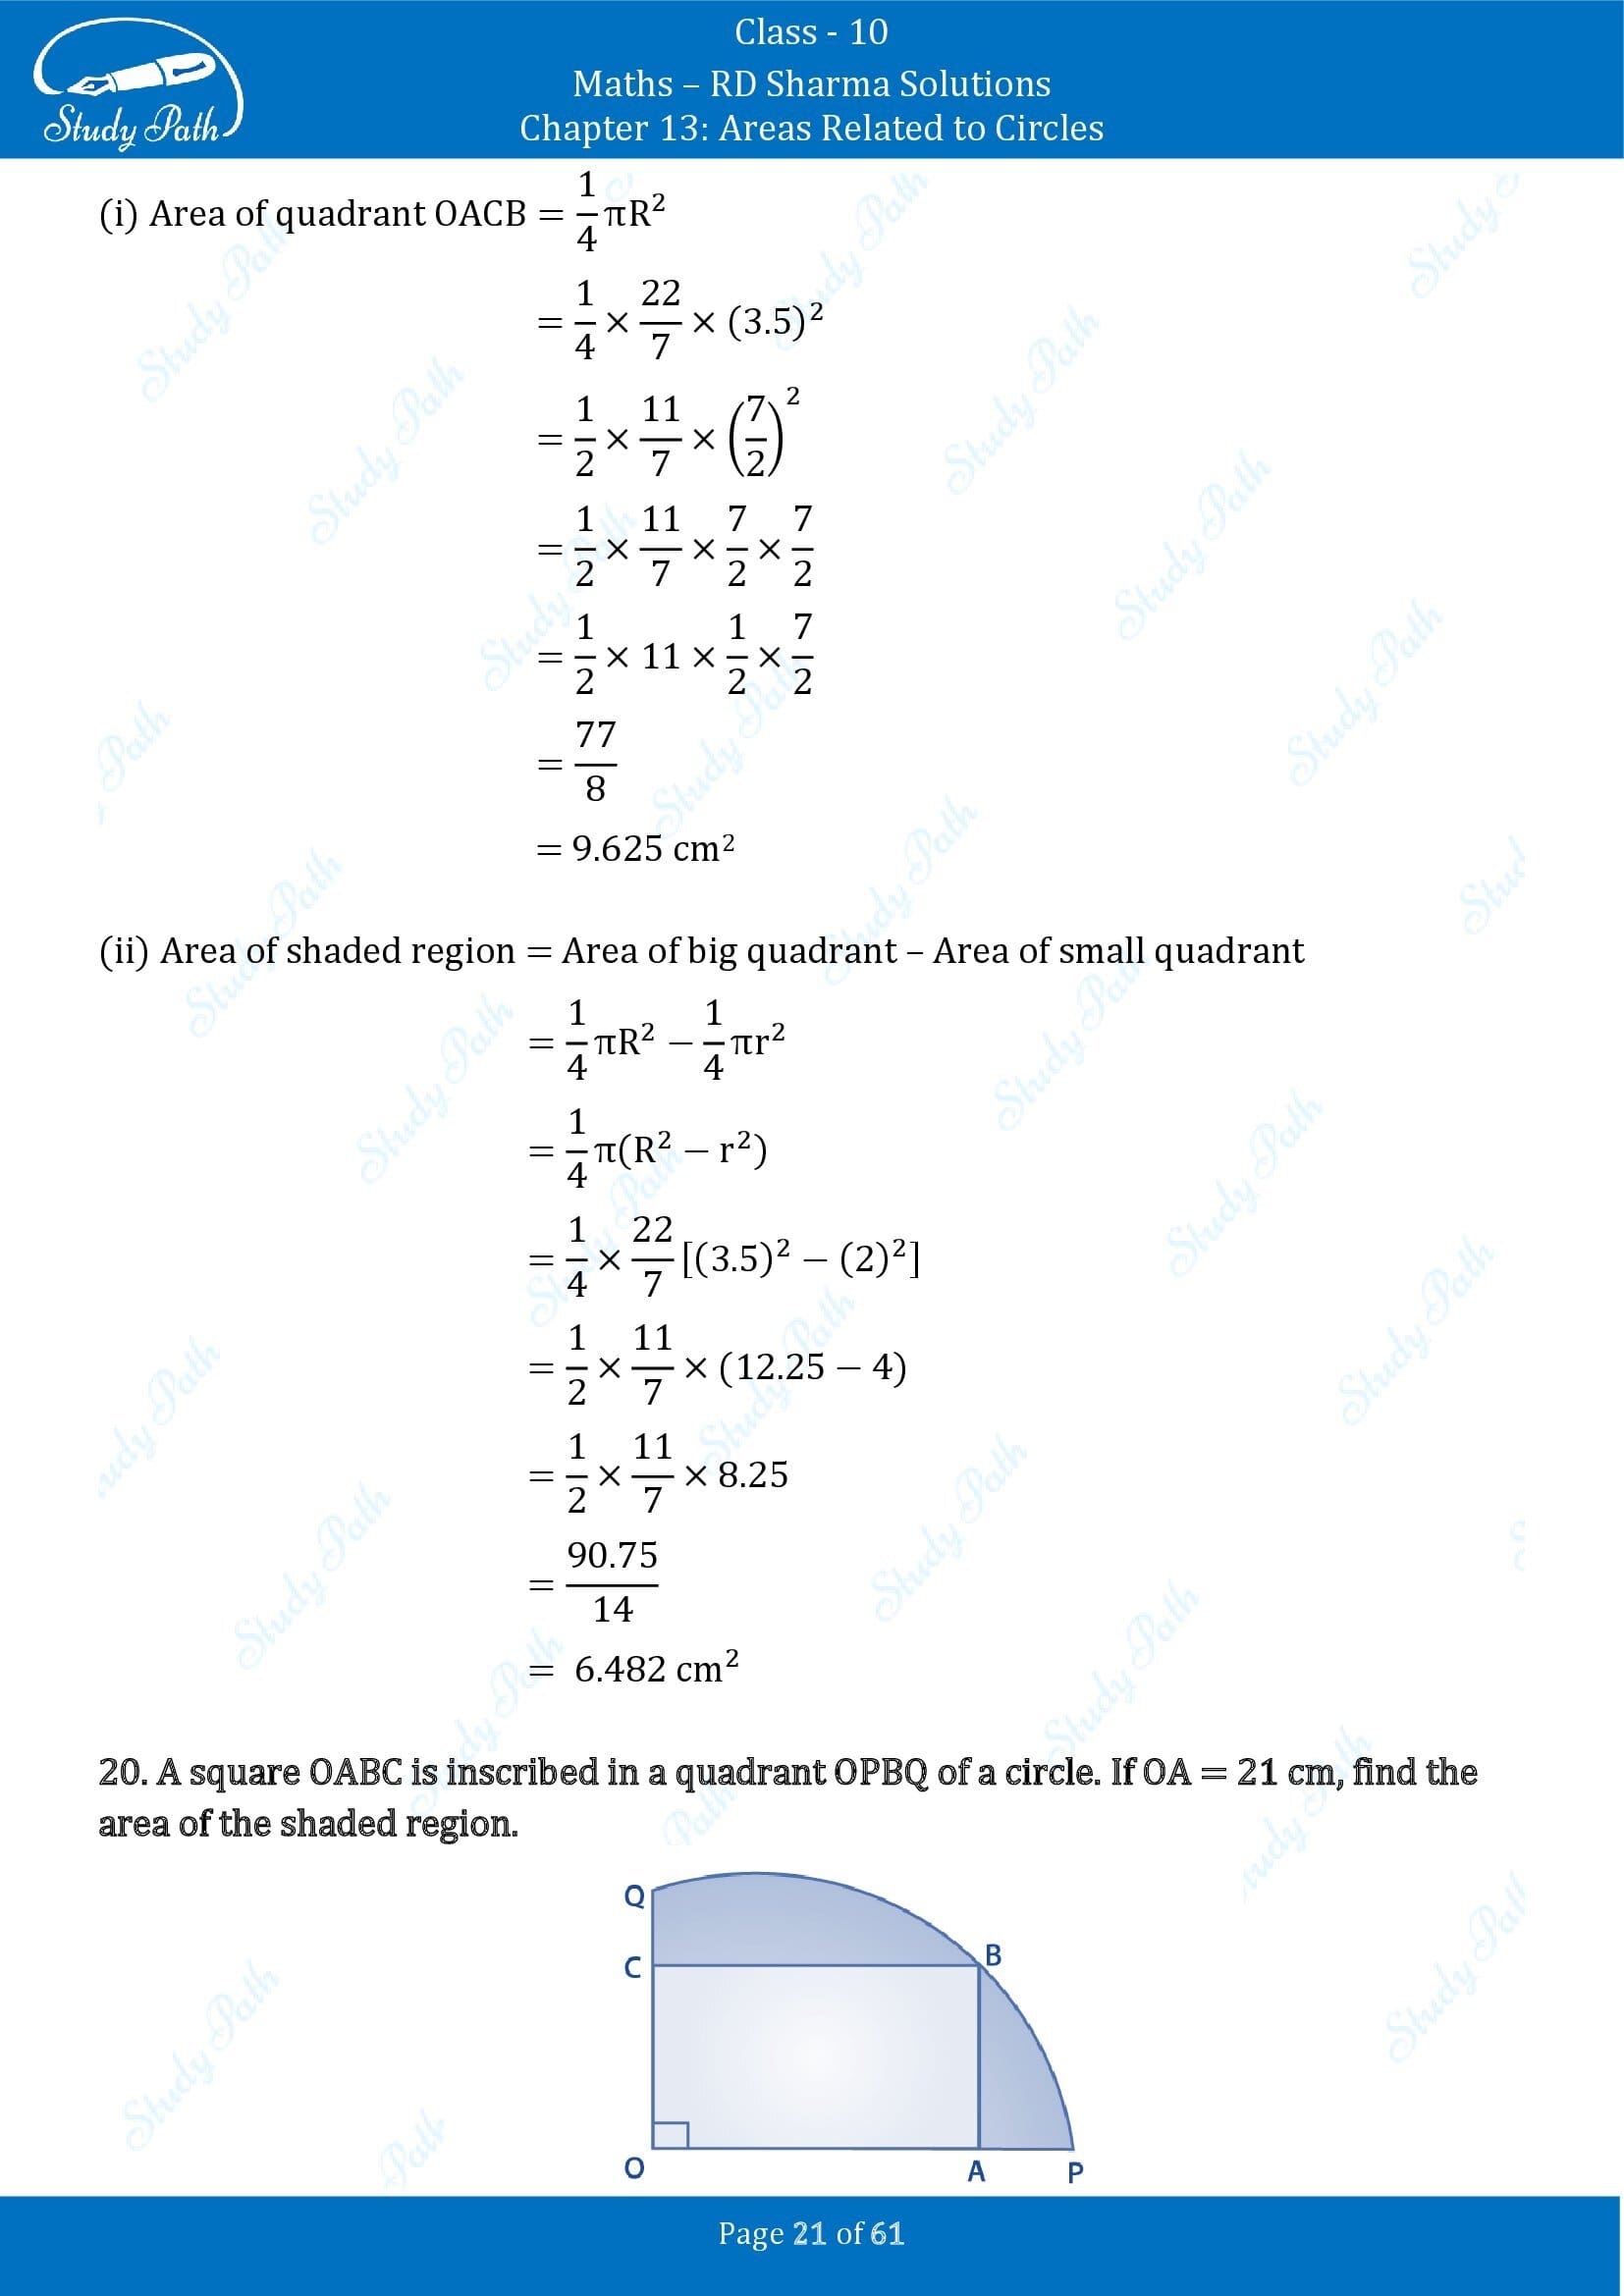 RD Sharma Solutions Class 10 Chapter 13 Areas Related to Circles Exercise 13.4 00021